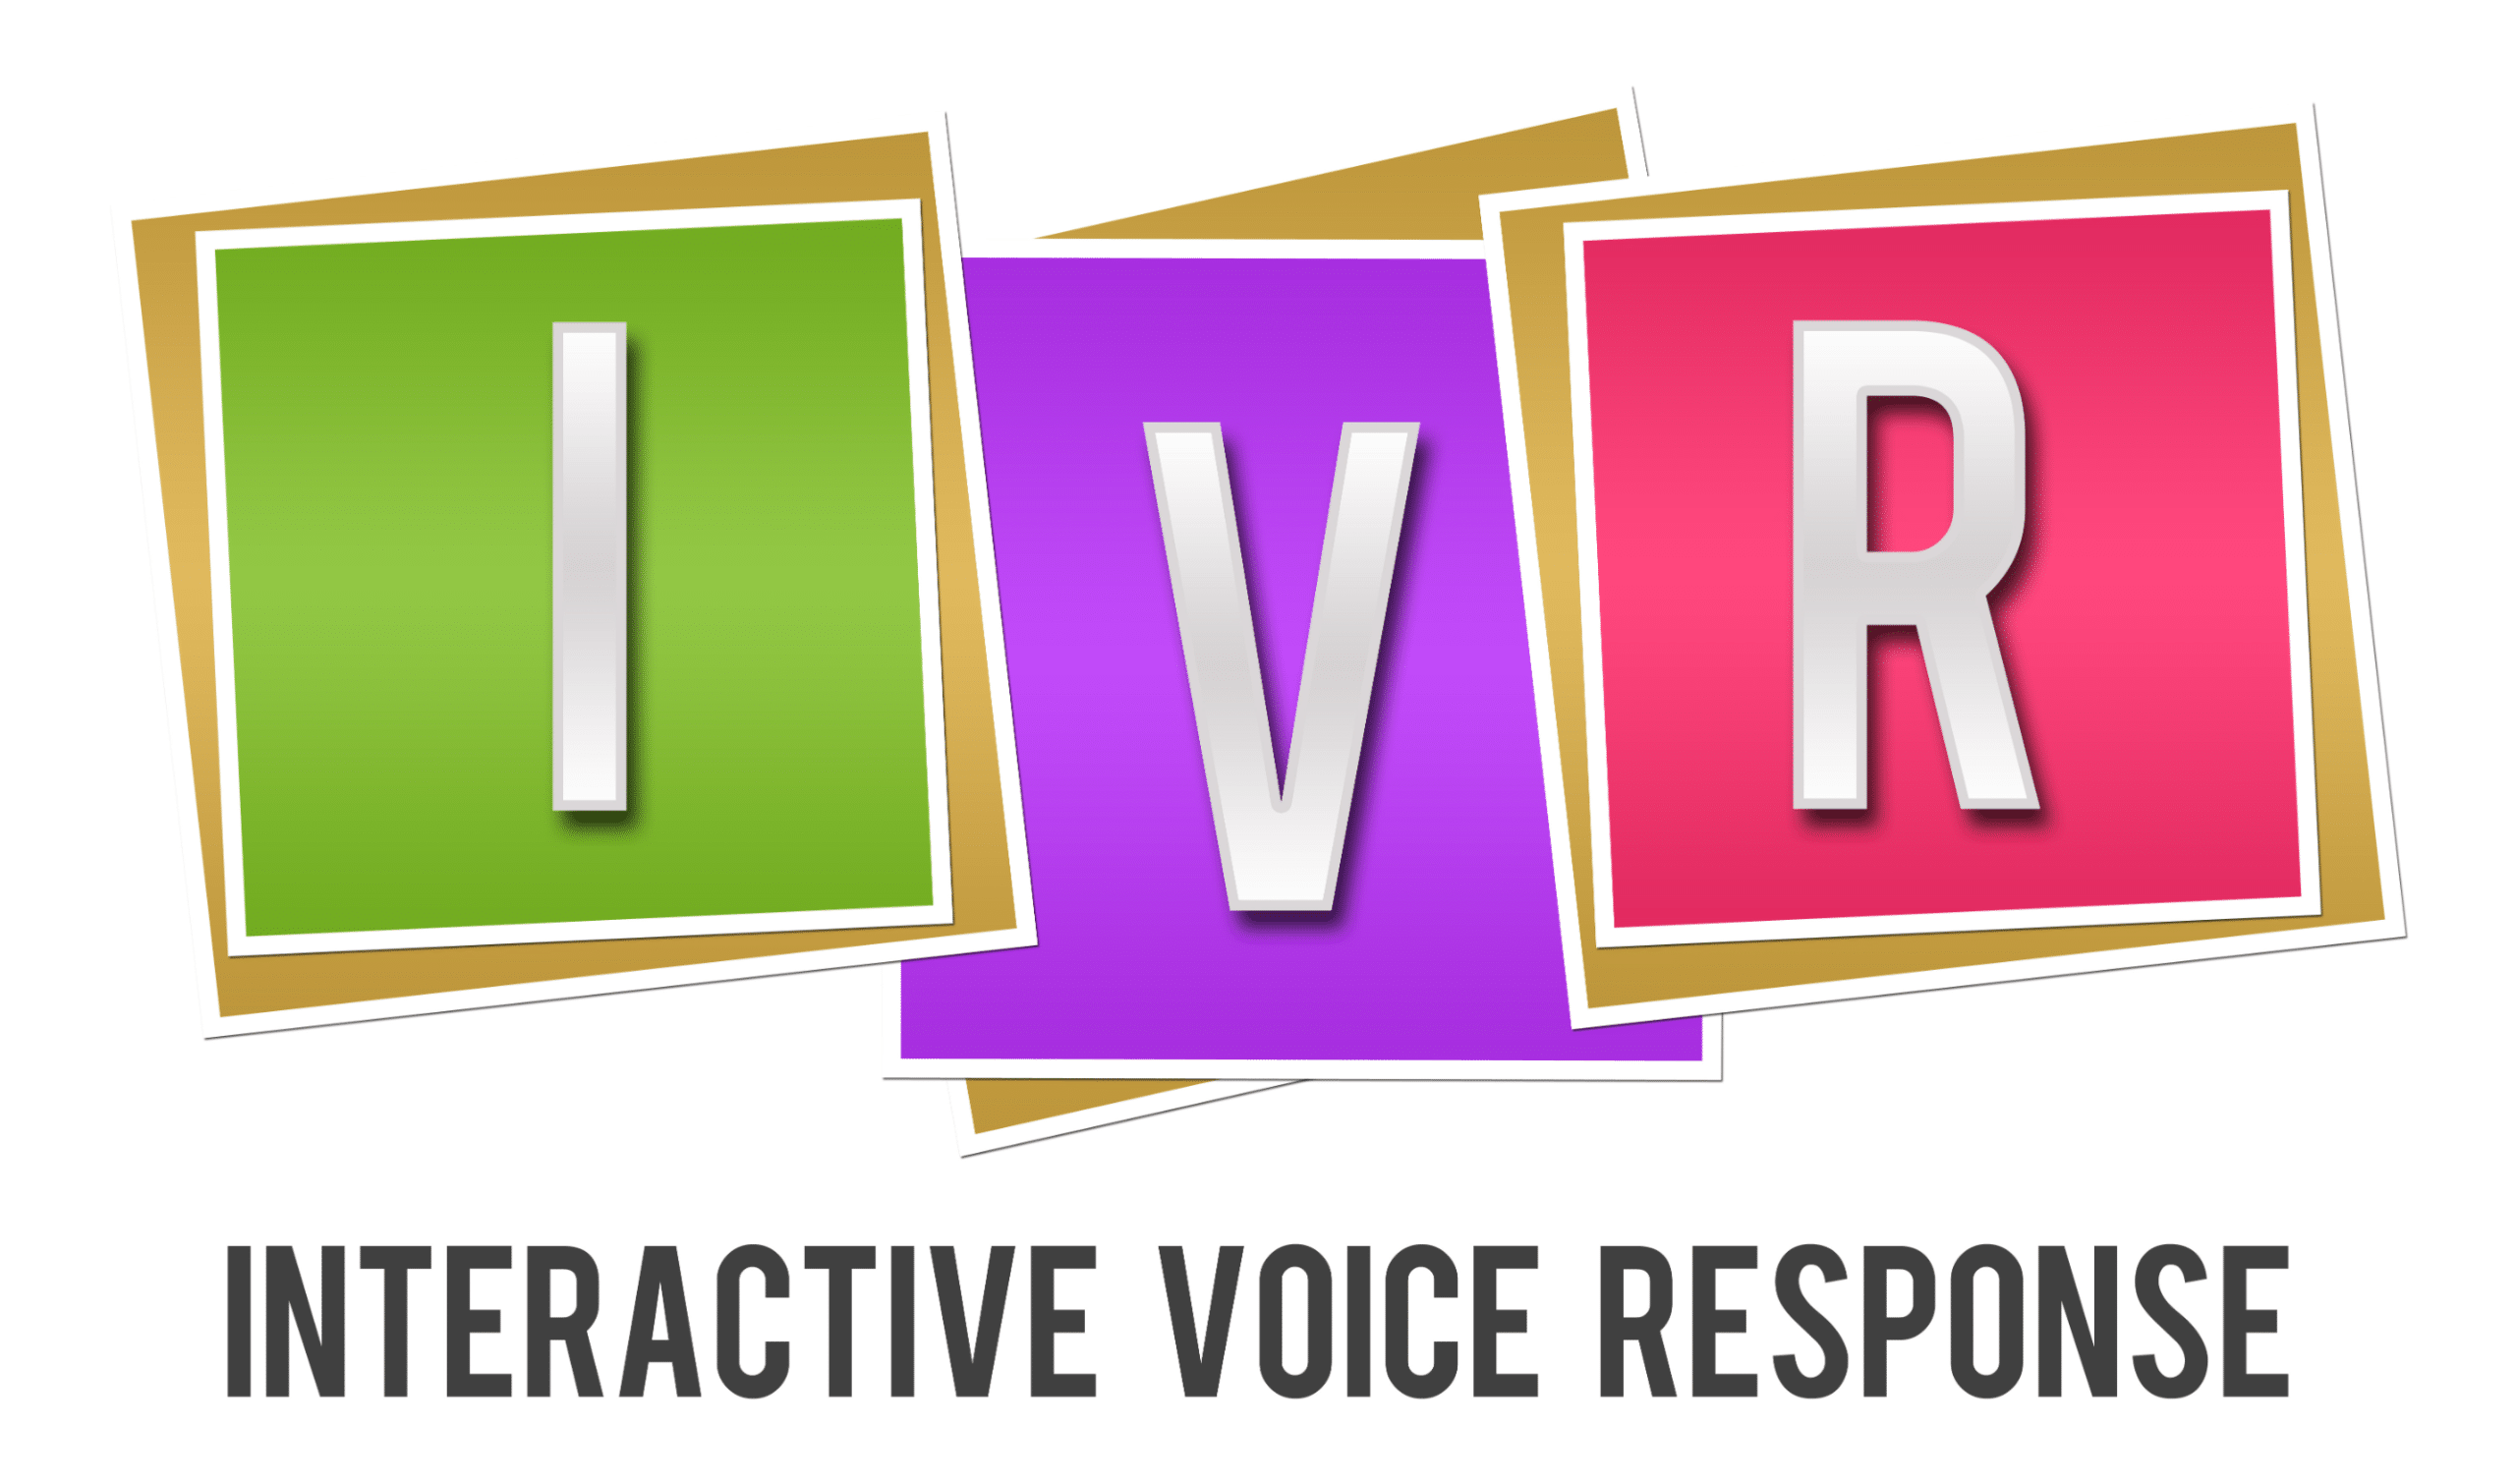 IVR, or Interactive Voice Response